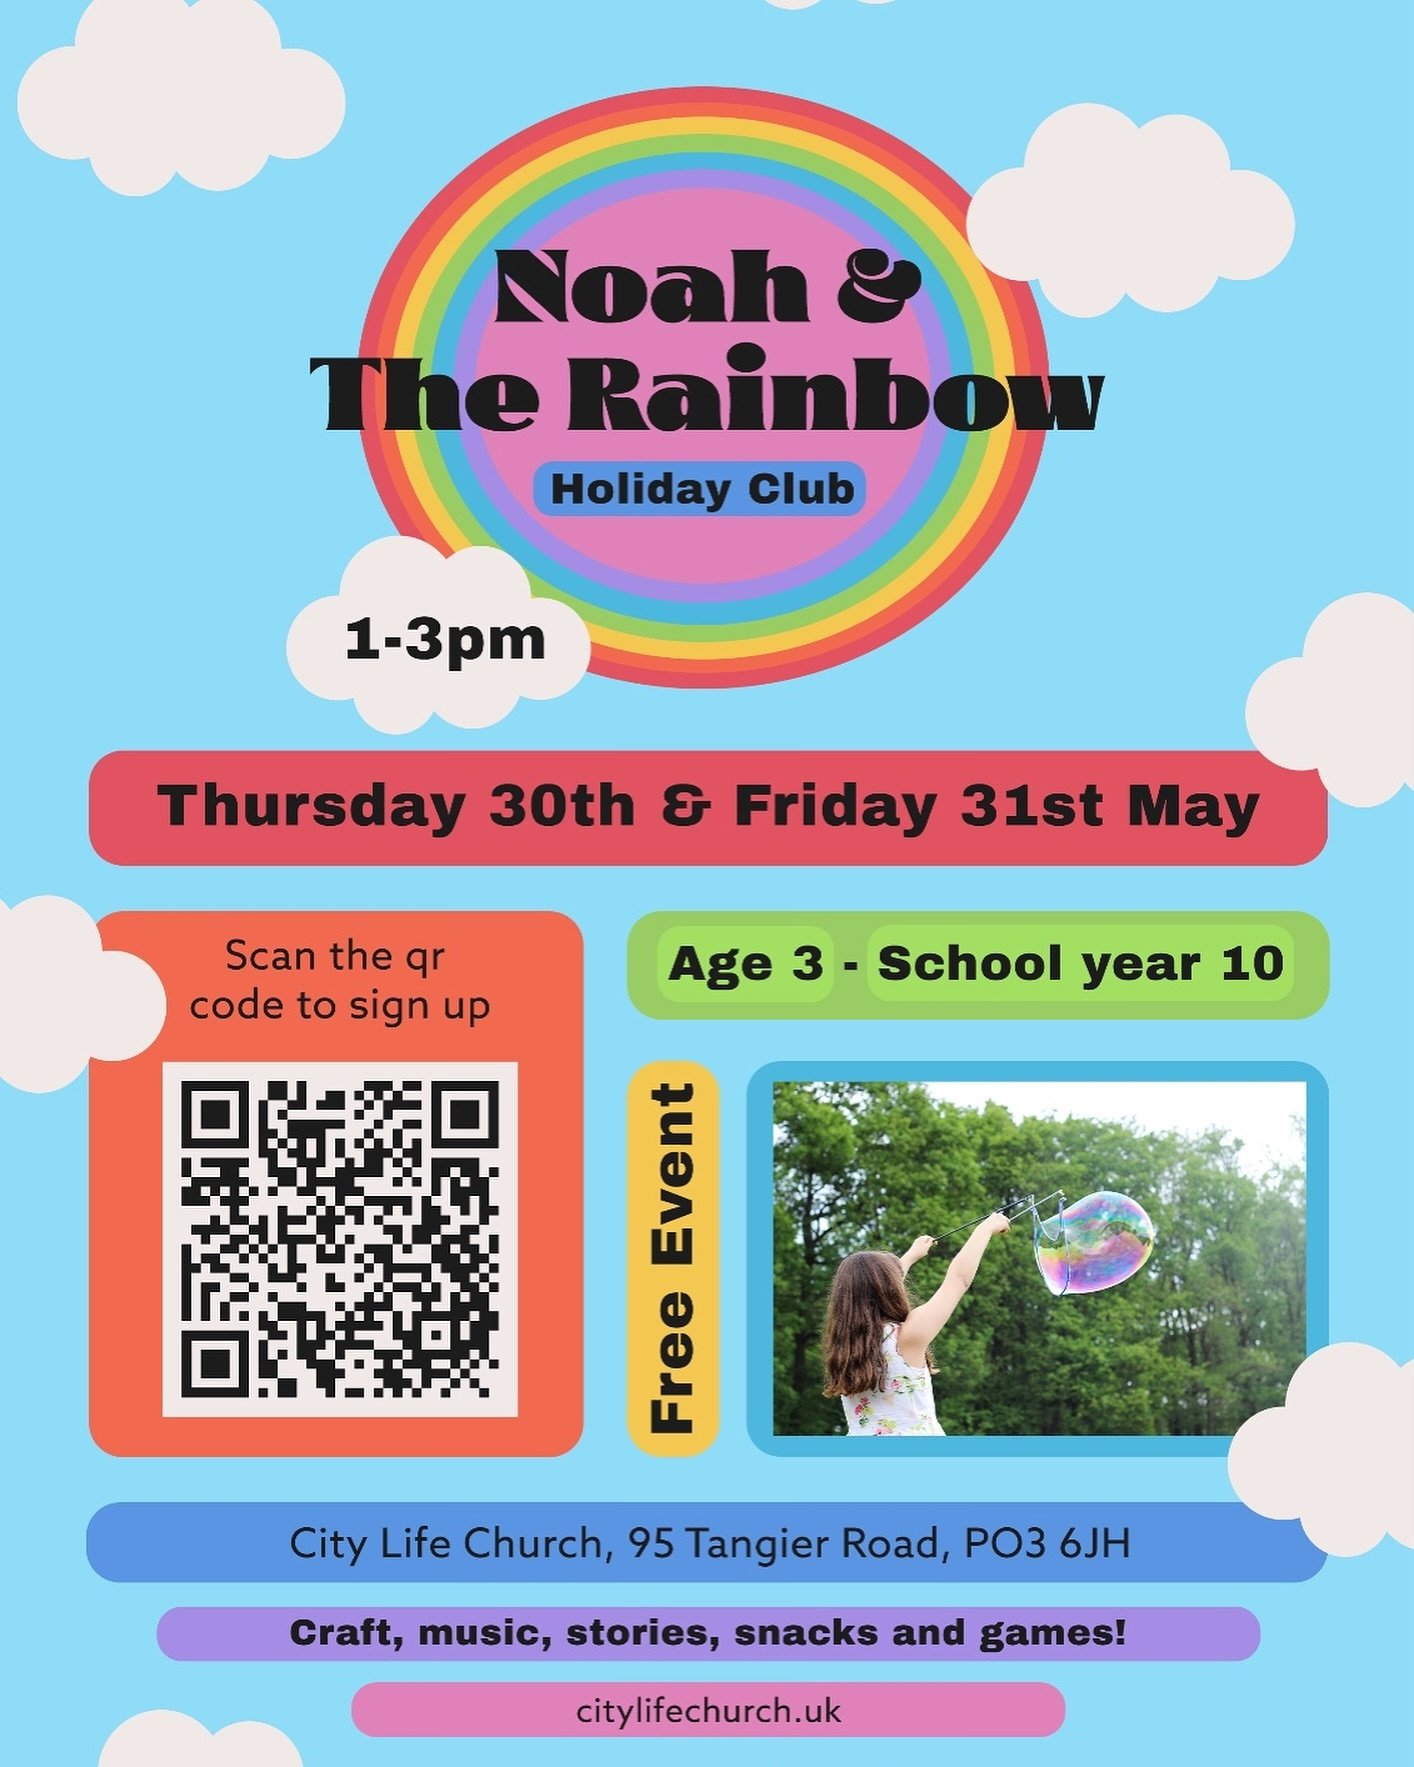 HALF TERM HOLIDAY CLUB

Announcing our next holiday club: Noah &amp; the Rainbow. 🌈 ☁️

Thursday 30th &amp; Friday 31st May, 1 - 3pm at City Life Church.

Due to the bank holiday, we are only able to run one time during half term so sign up quickly 